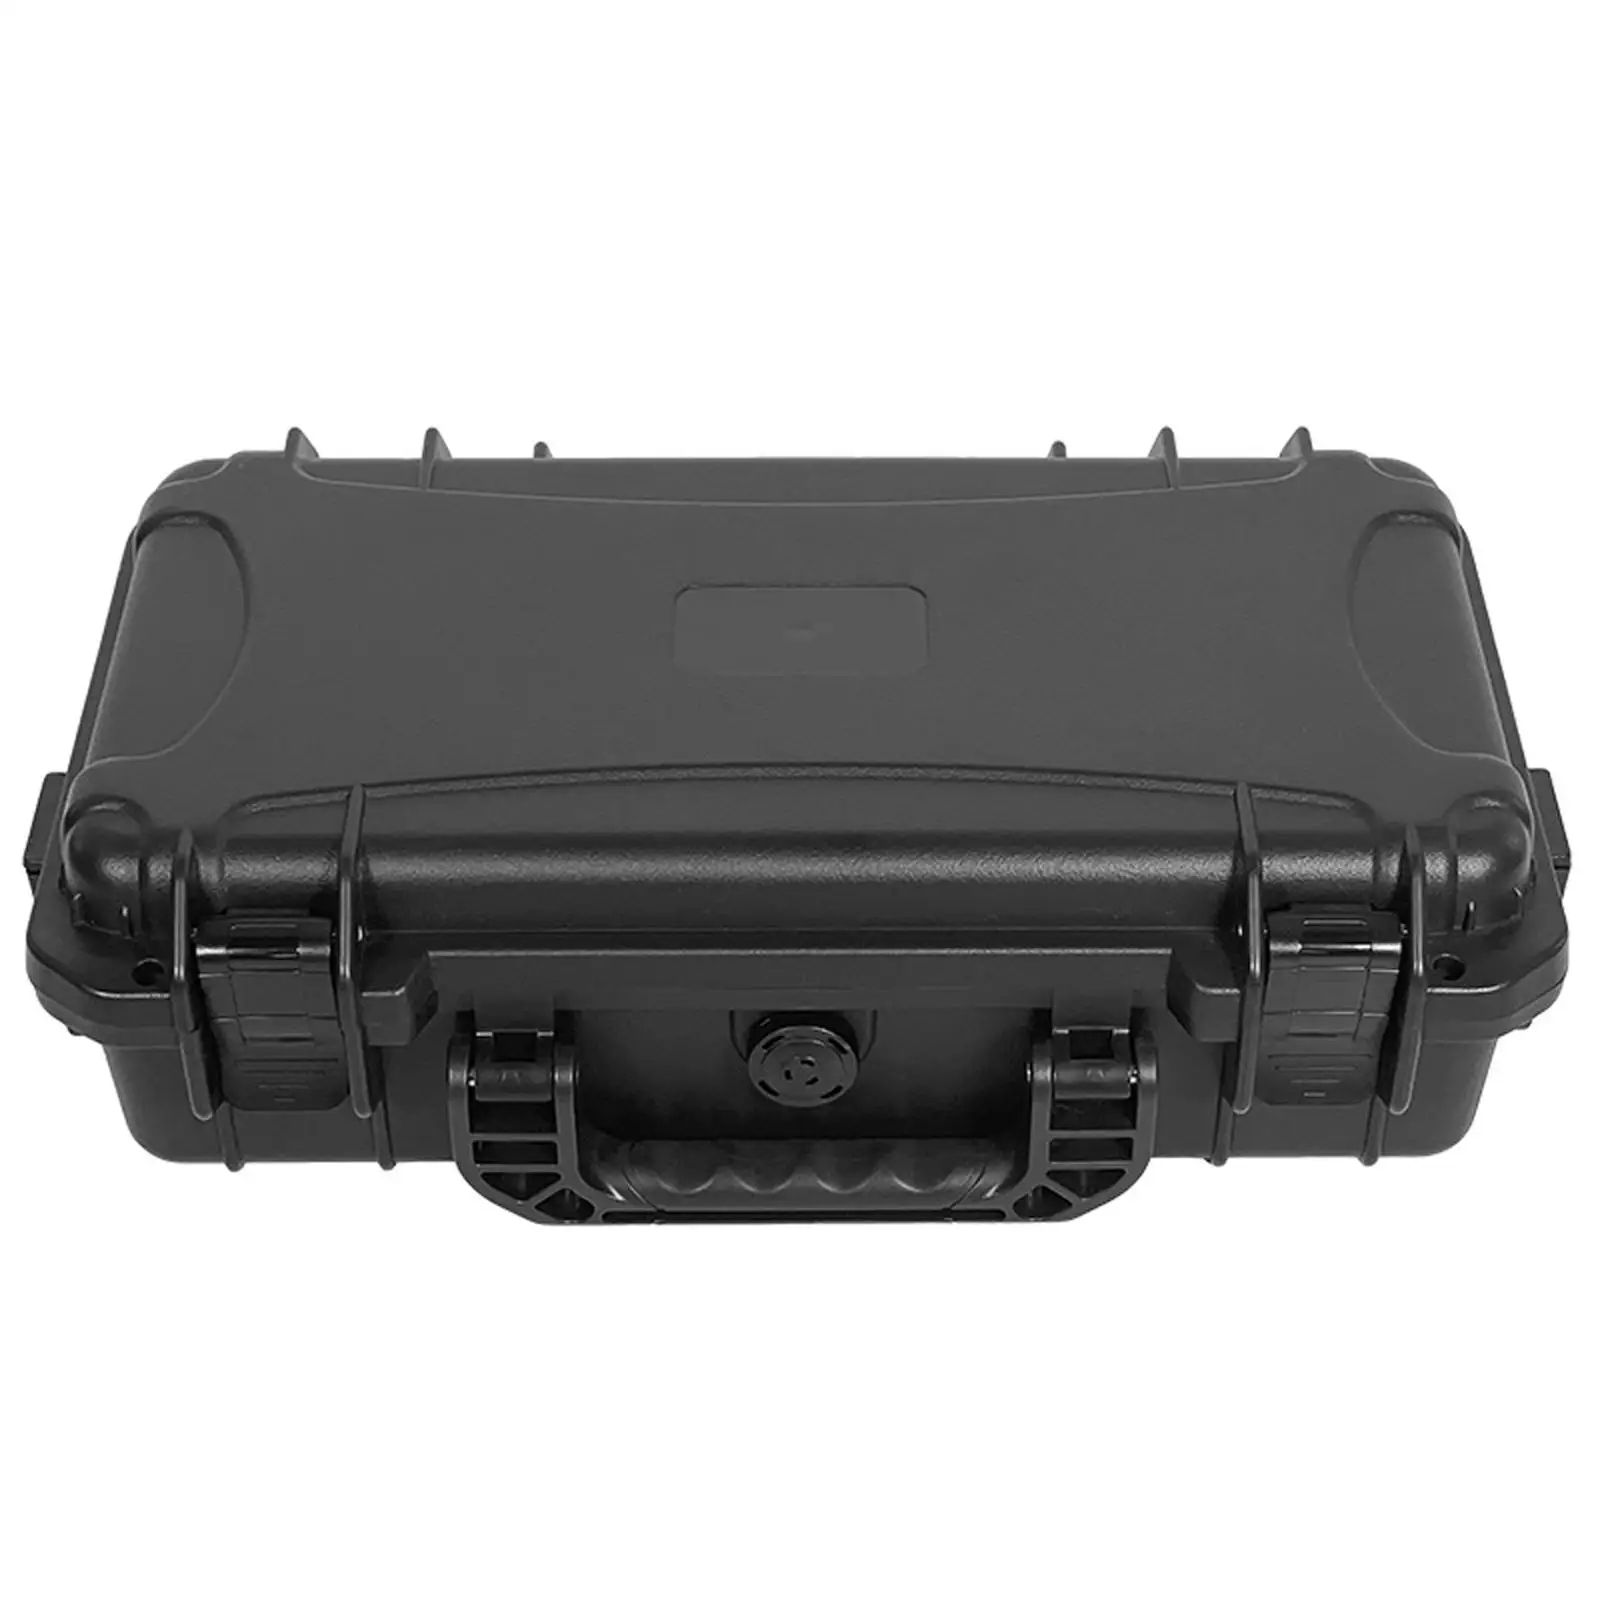 Shockproof Tool Box carry tools Case Shatterproof Waterproof Sealed Box for Photographic Equipment Camping Transportation